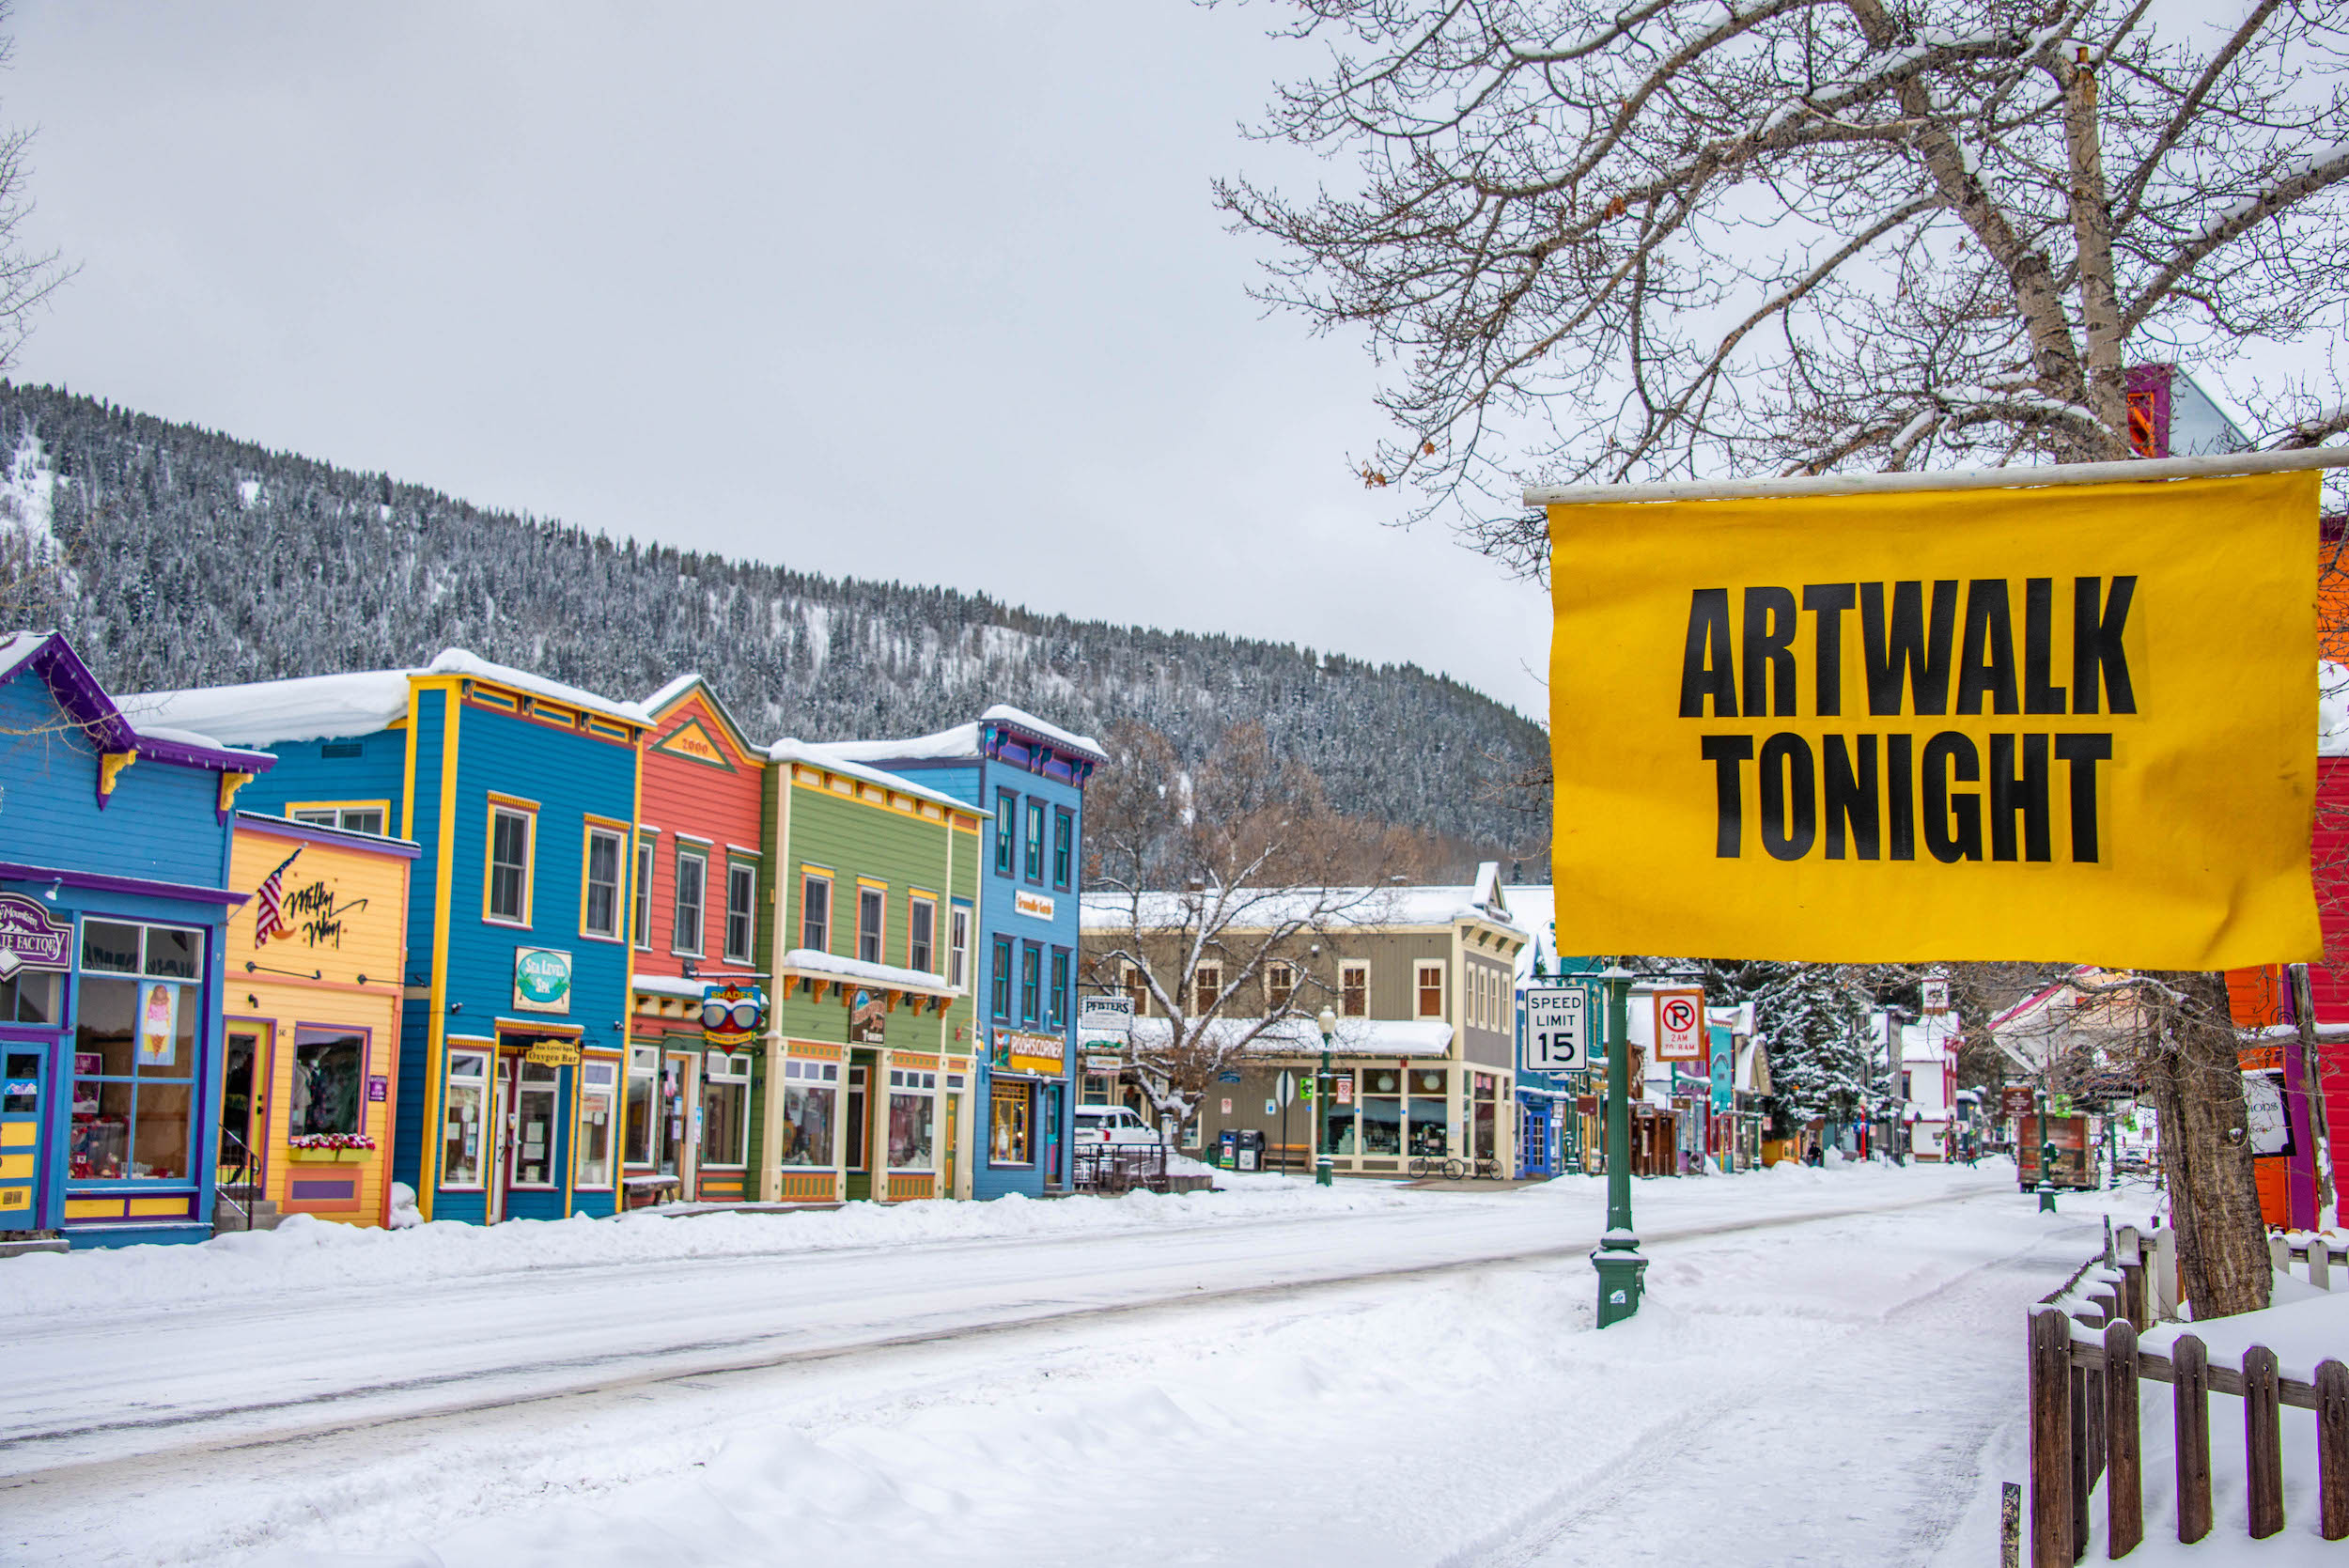 Downtown Crested Butte in the snow with a sign that says "artwalk tonight" advertising the monthly art walk to see local art in Crested Butte